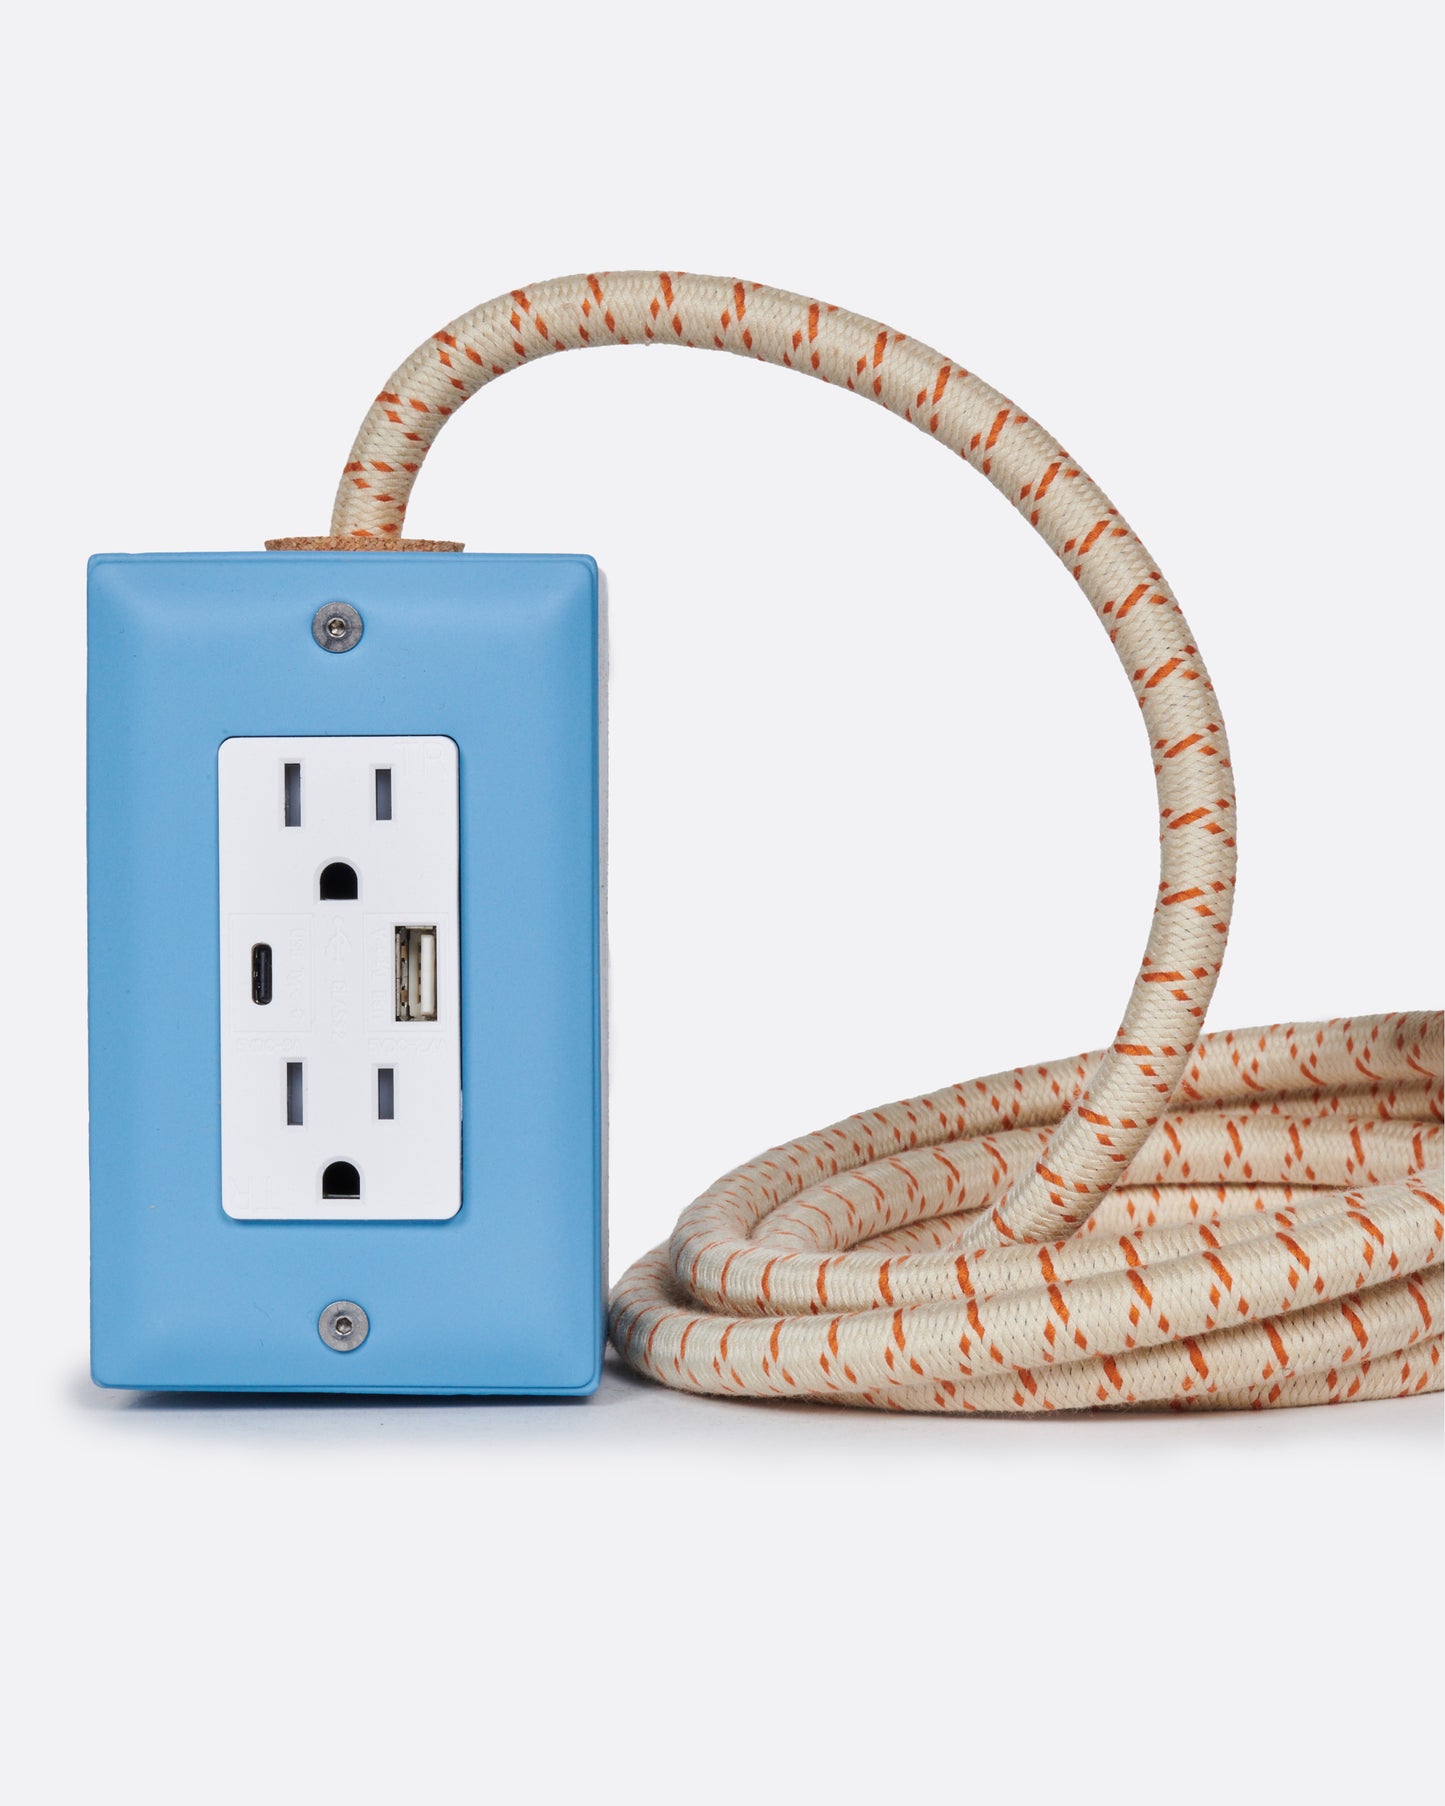 A handmade extension cord that utilizes smart USB and USB C technology to charge your device faster by identifying it and sending it a matching charge.